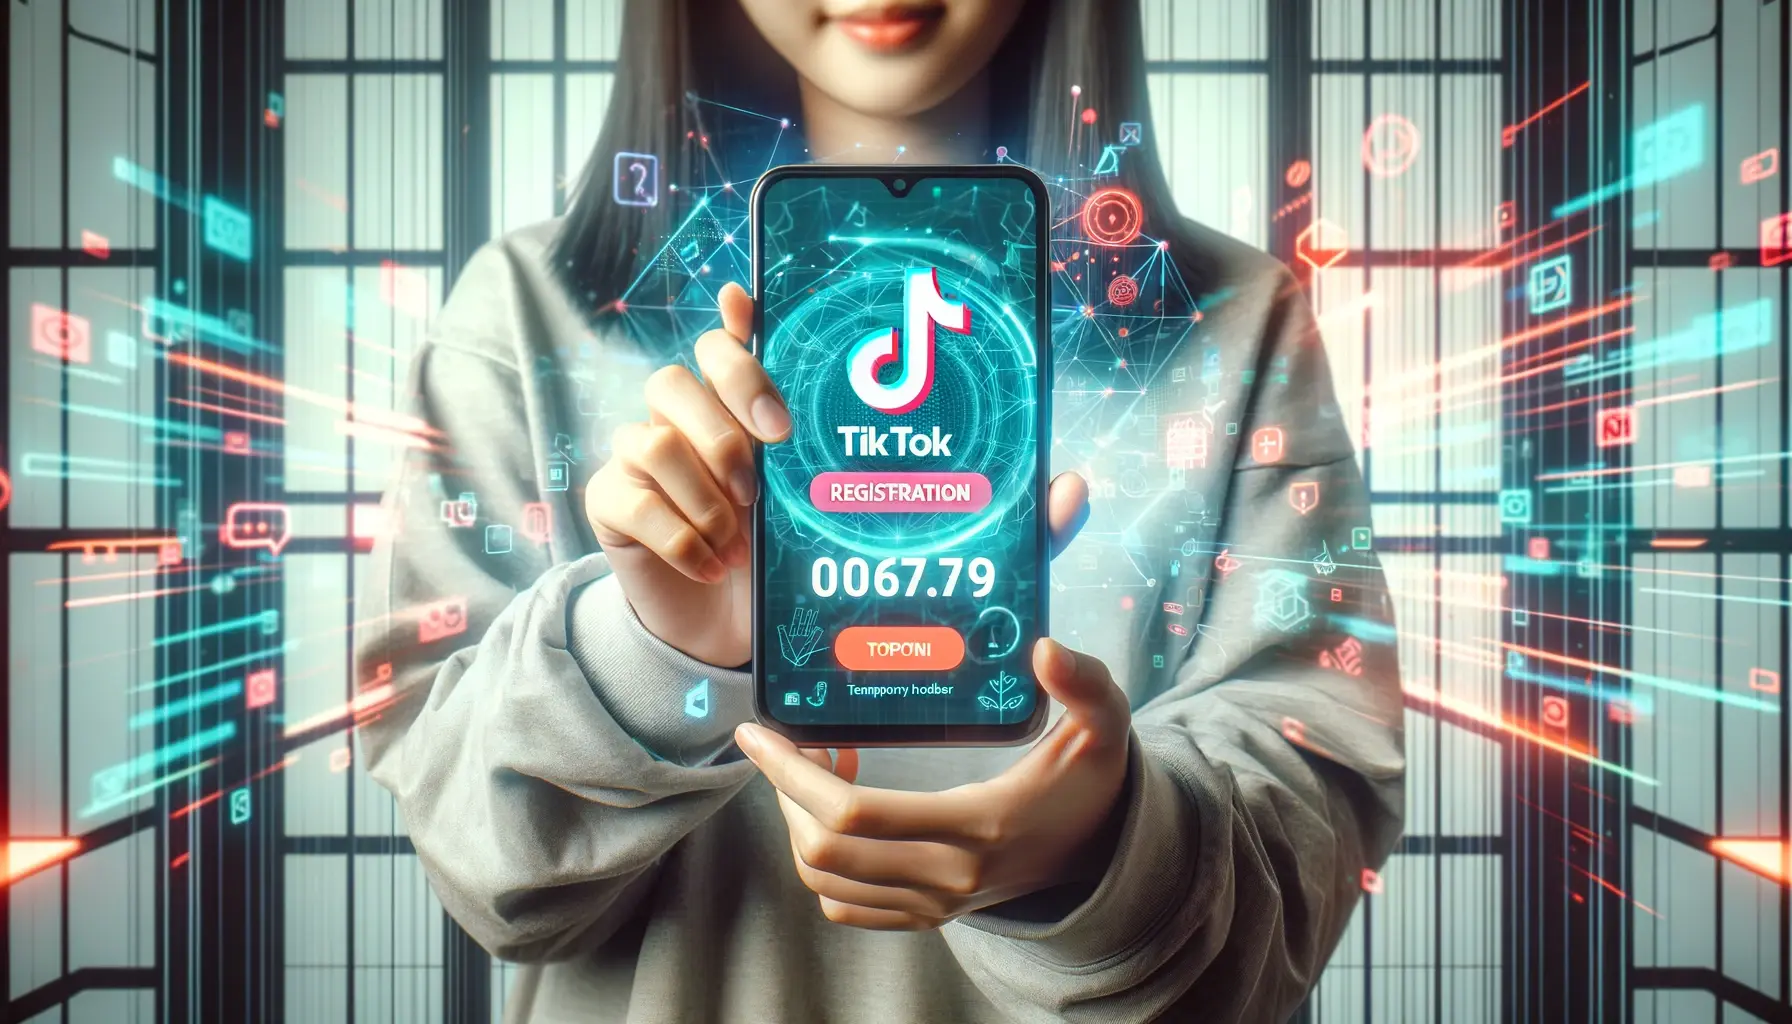 How to Register on TikTok Using a Temporary Phone Number